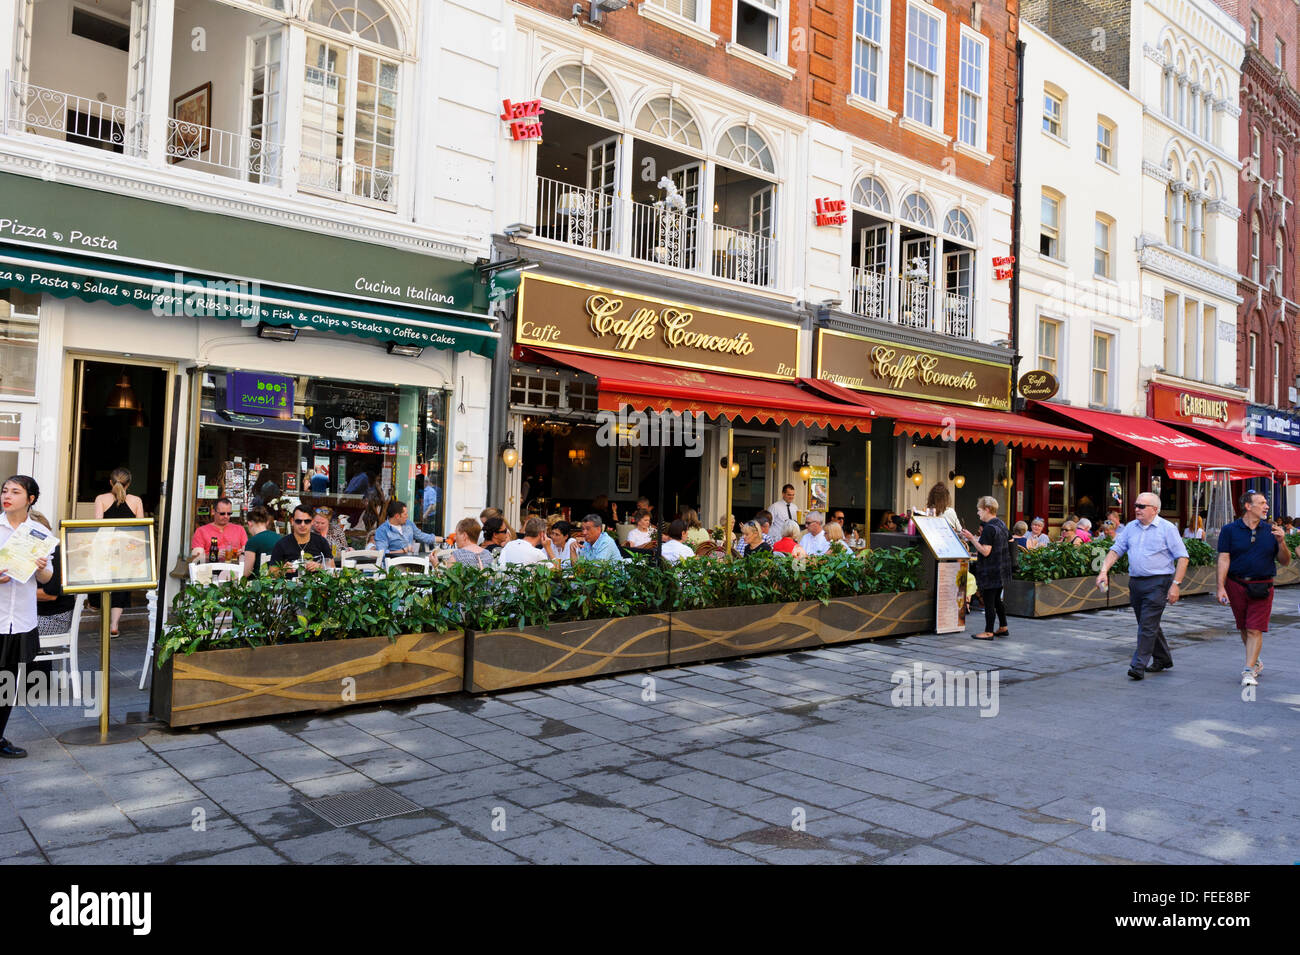 A street in the popular Leicester Square district with bars, restaurants and cafés, London, United Kingdom. Stock Photo